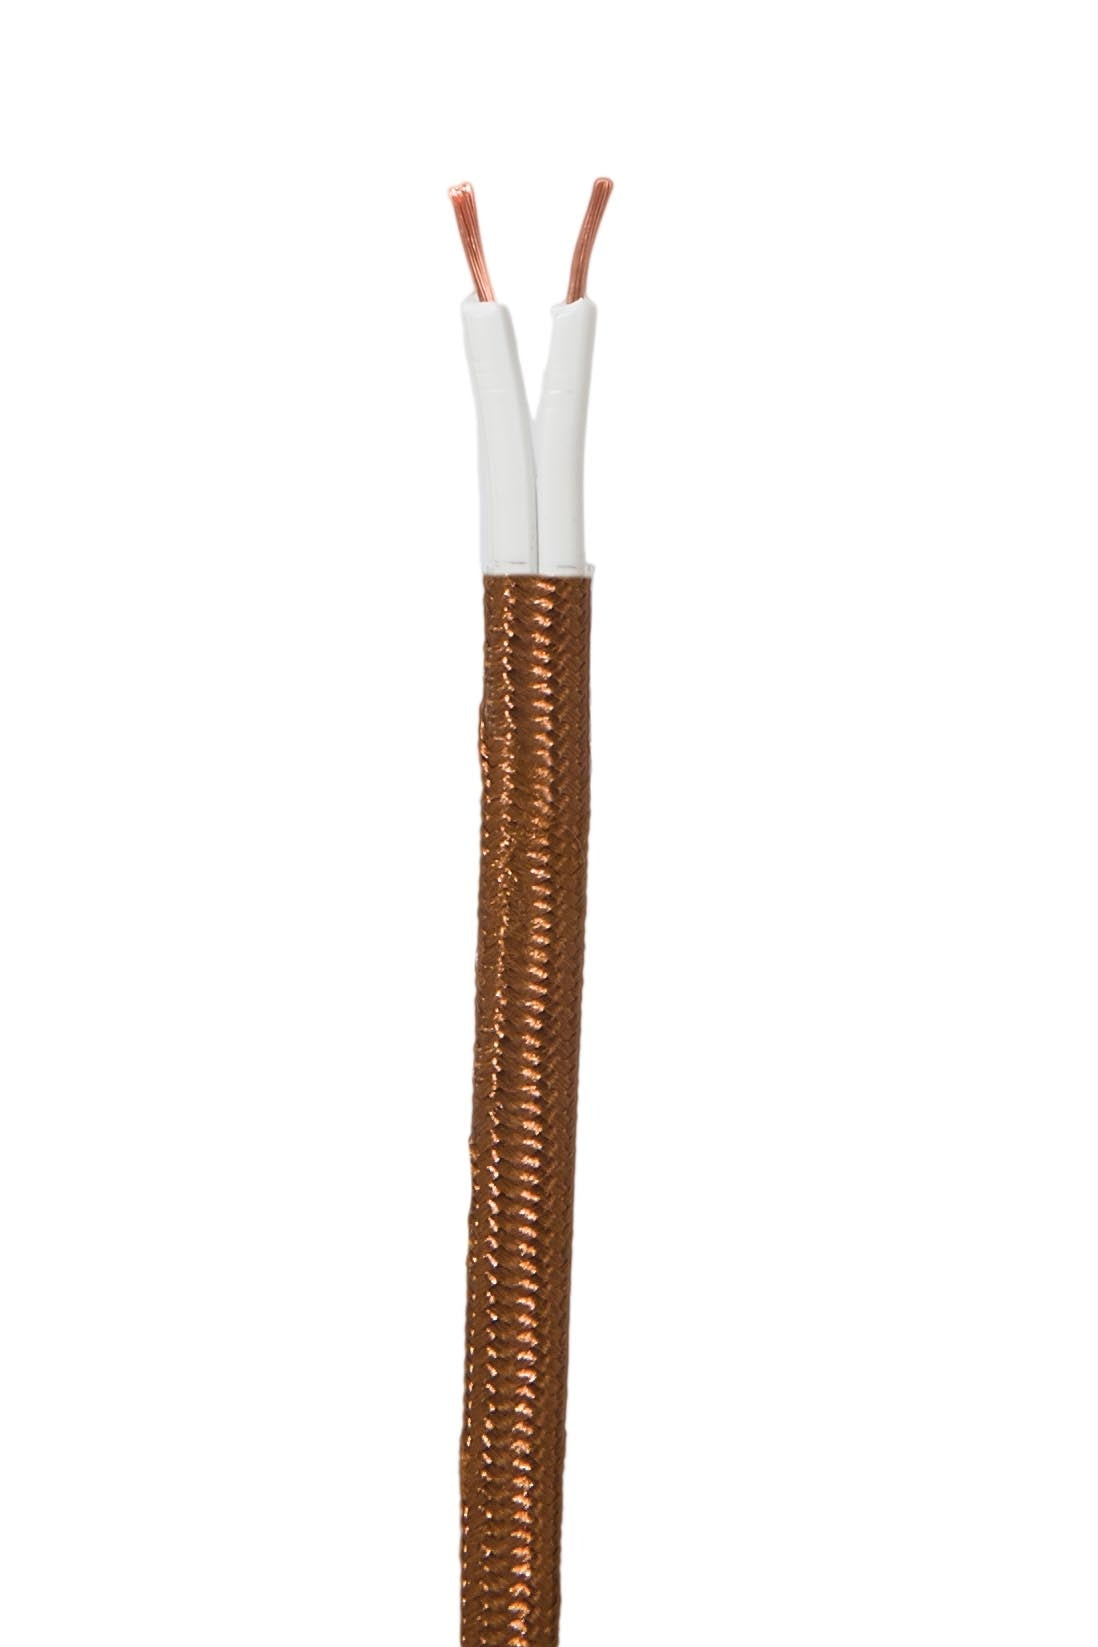 Light Brown 18 Gauge SPT-2 Fabric Parallel Lamp Cord, Choice of Length 